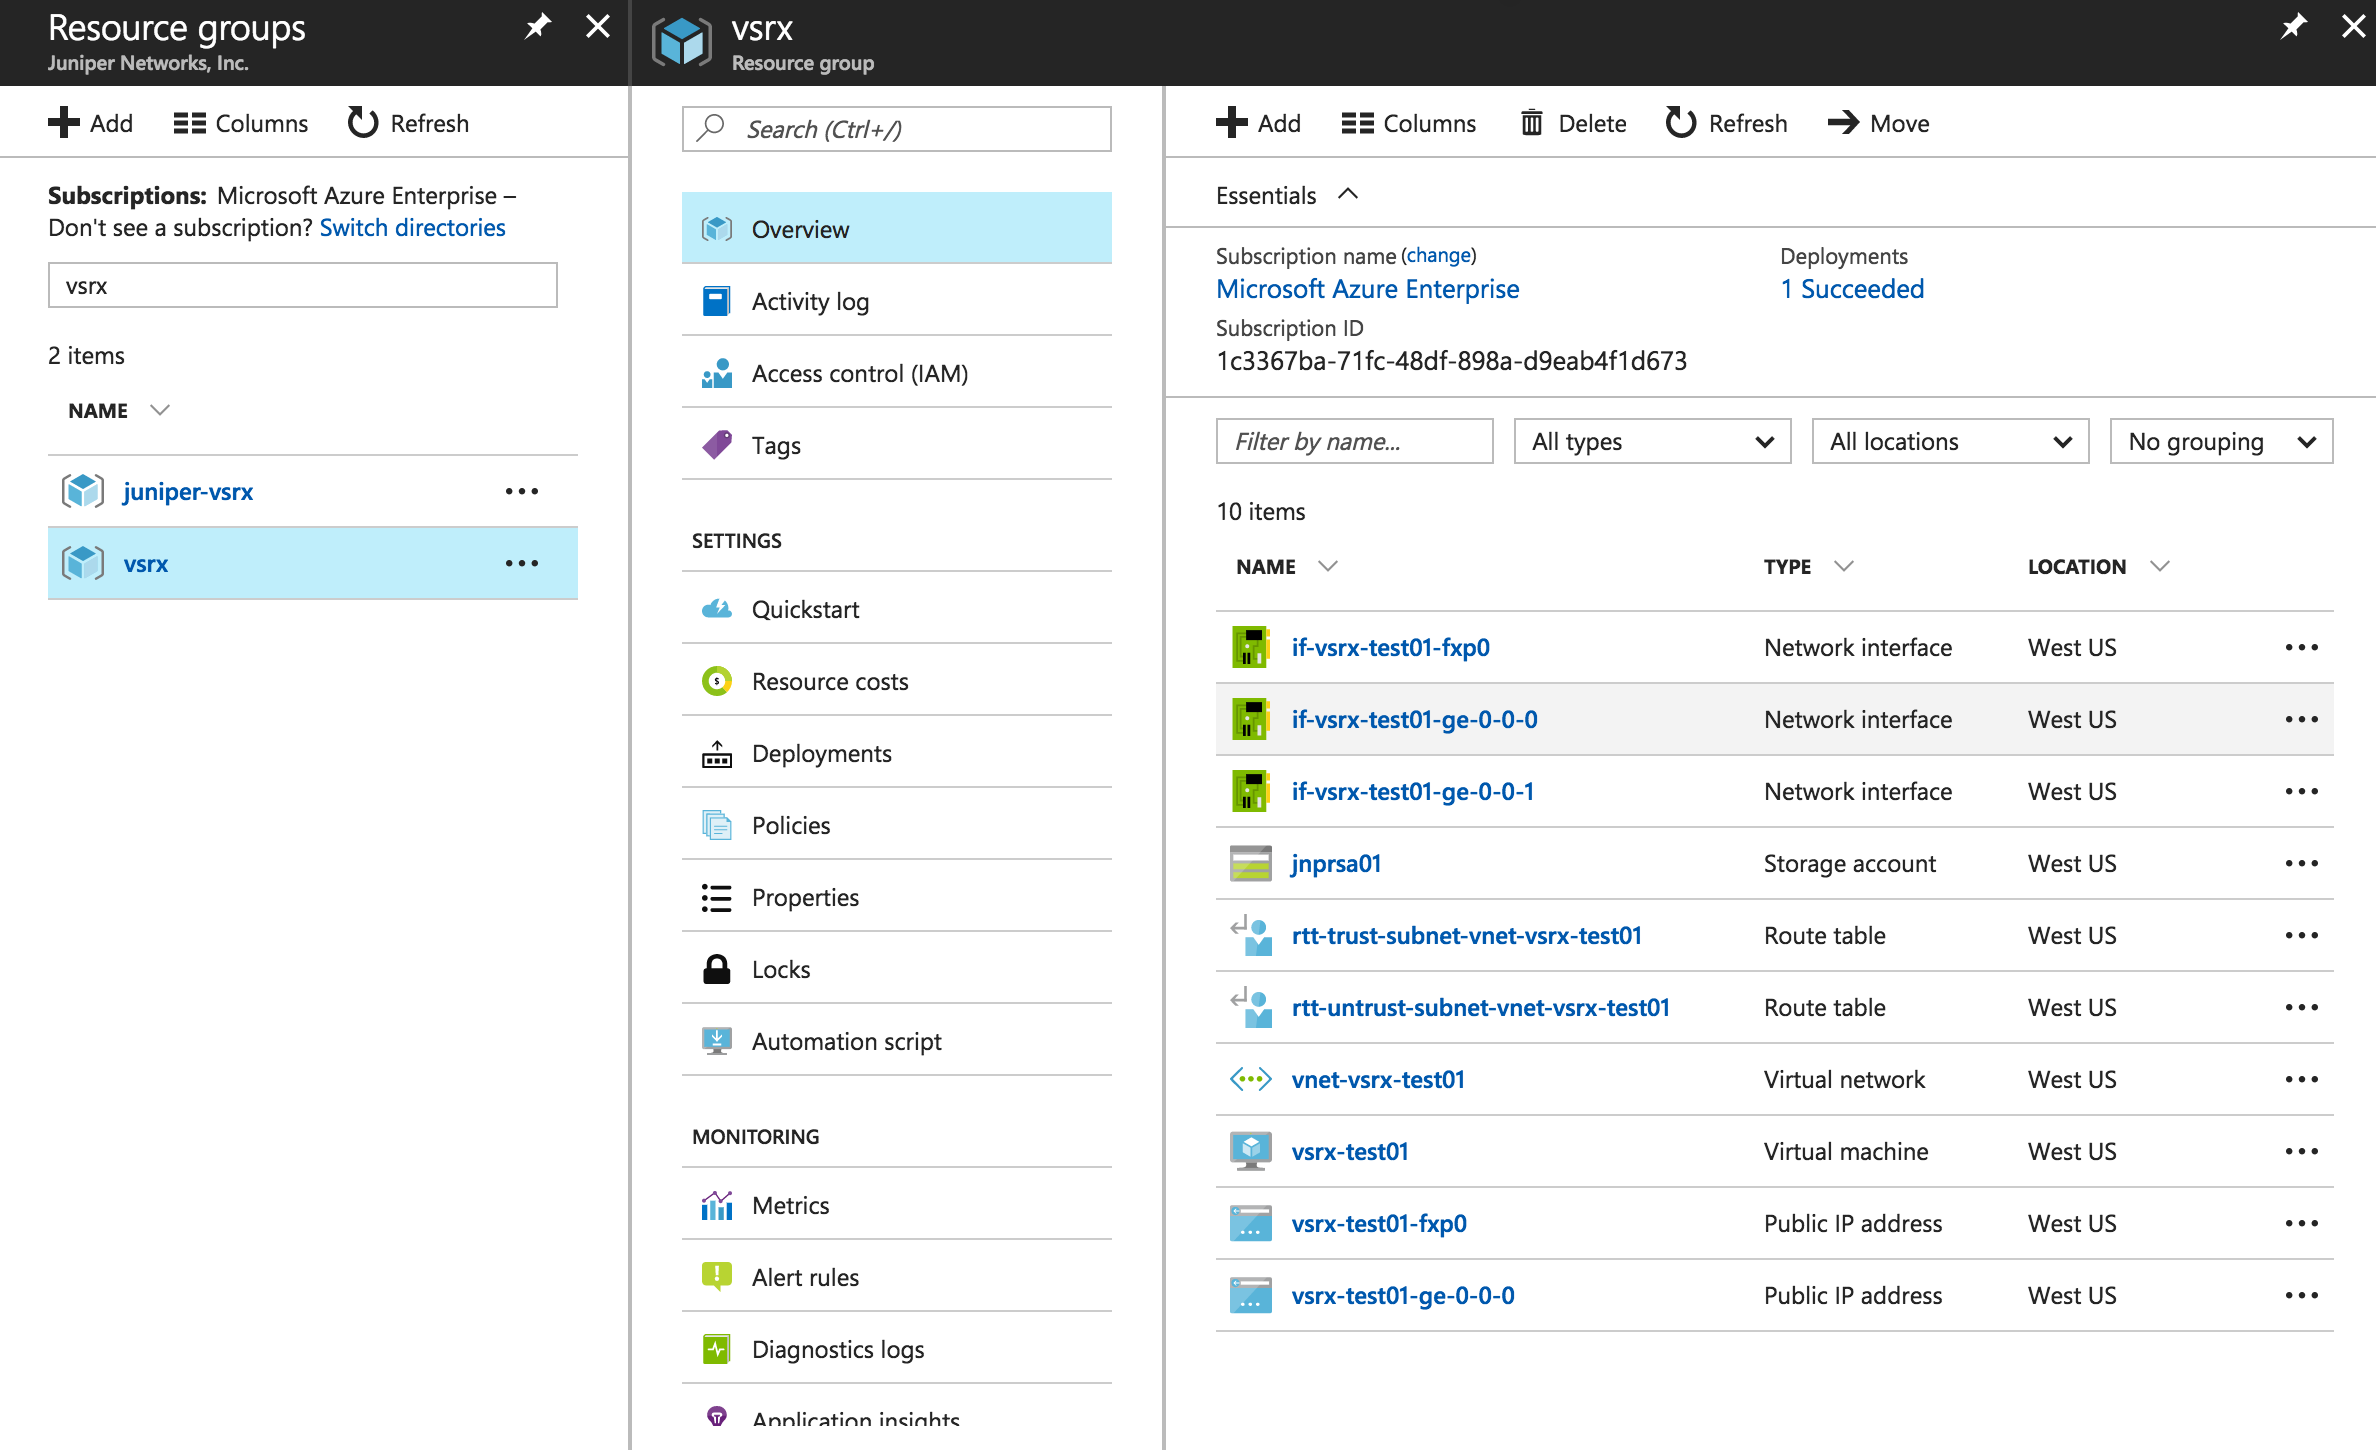 Microsoft Azure Resource Groups Page Example